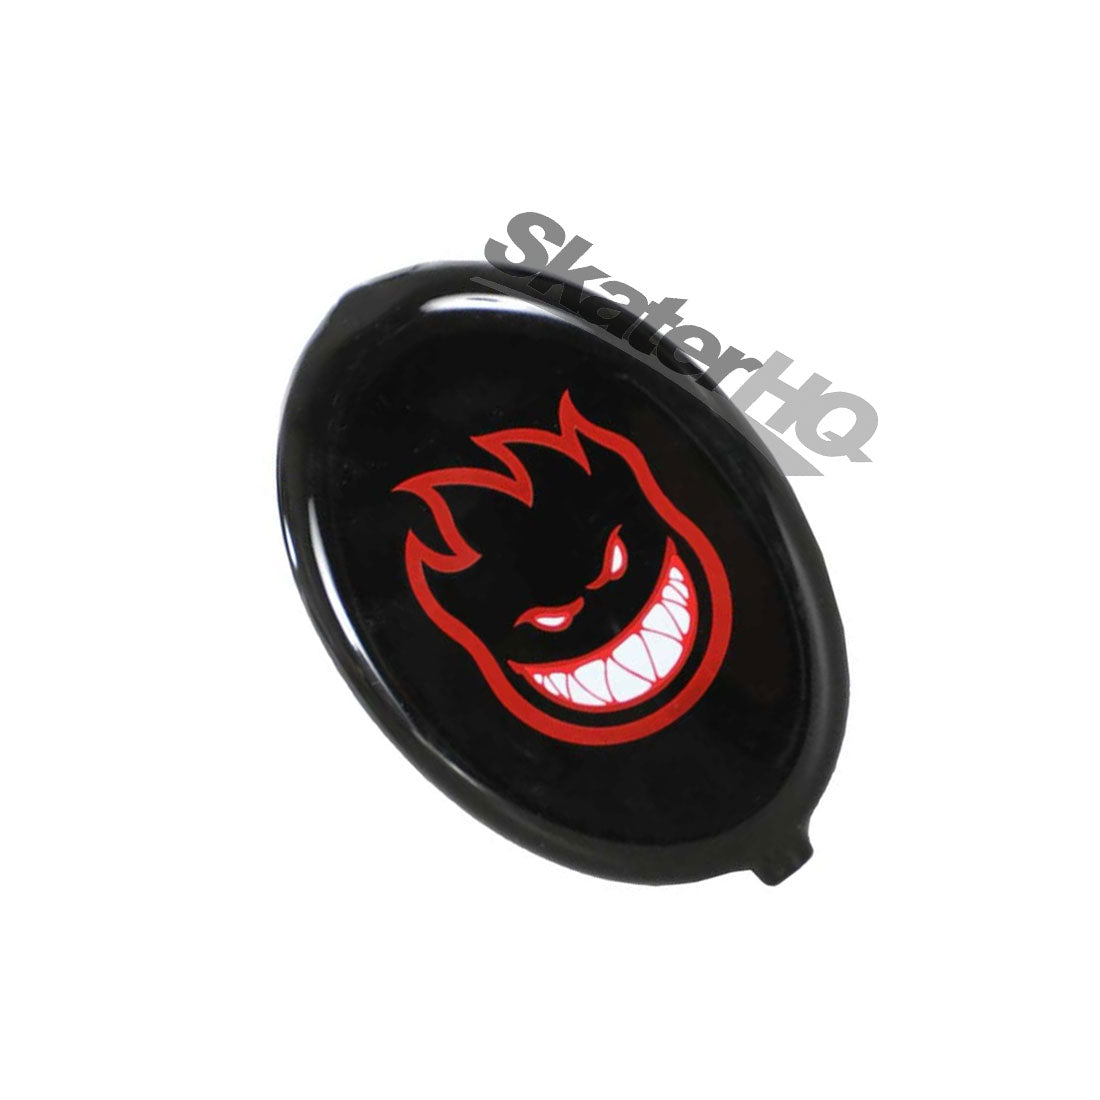 Spitfire Bighead Coin Pouch - Black/Red